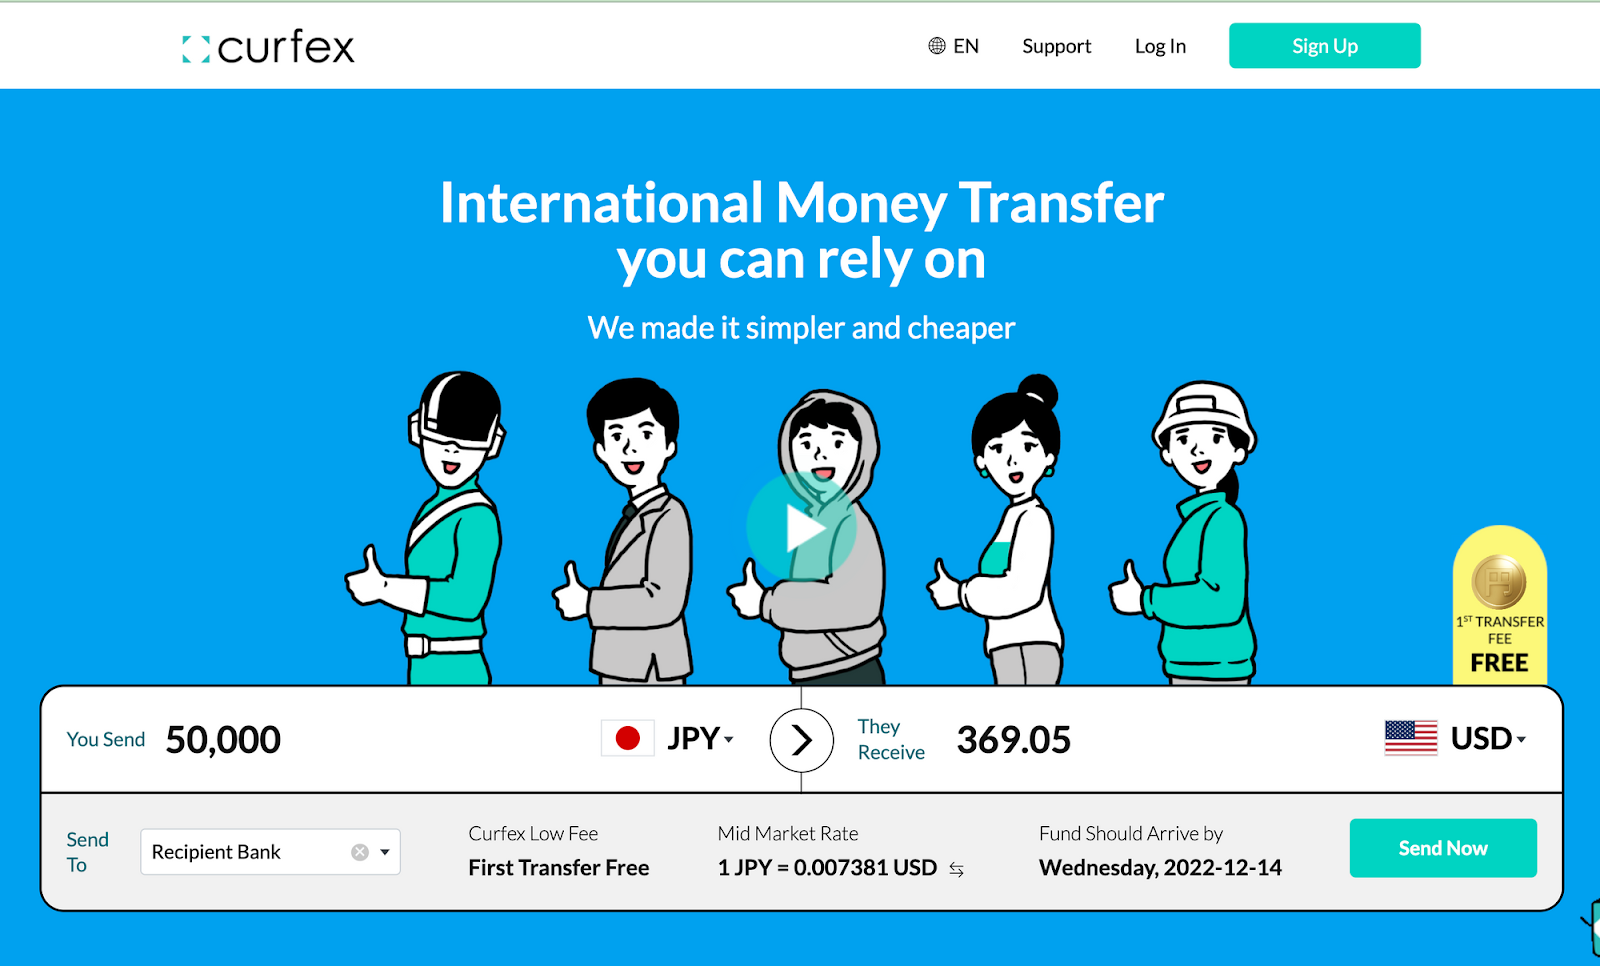 Recommended International Money Transfers Services for Studying Abroad